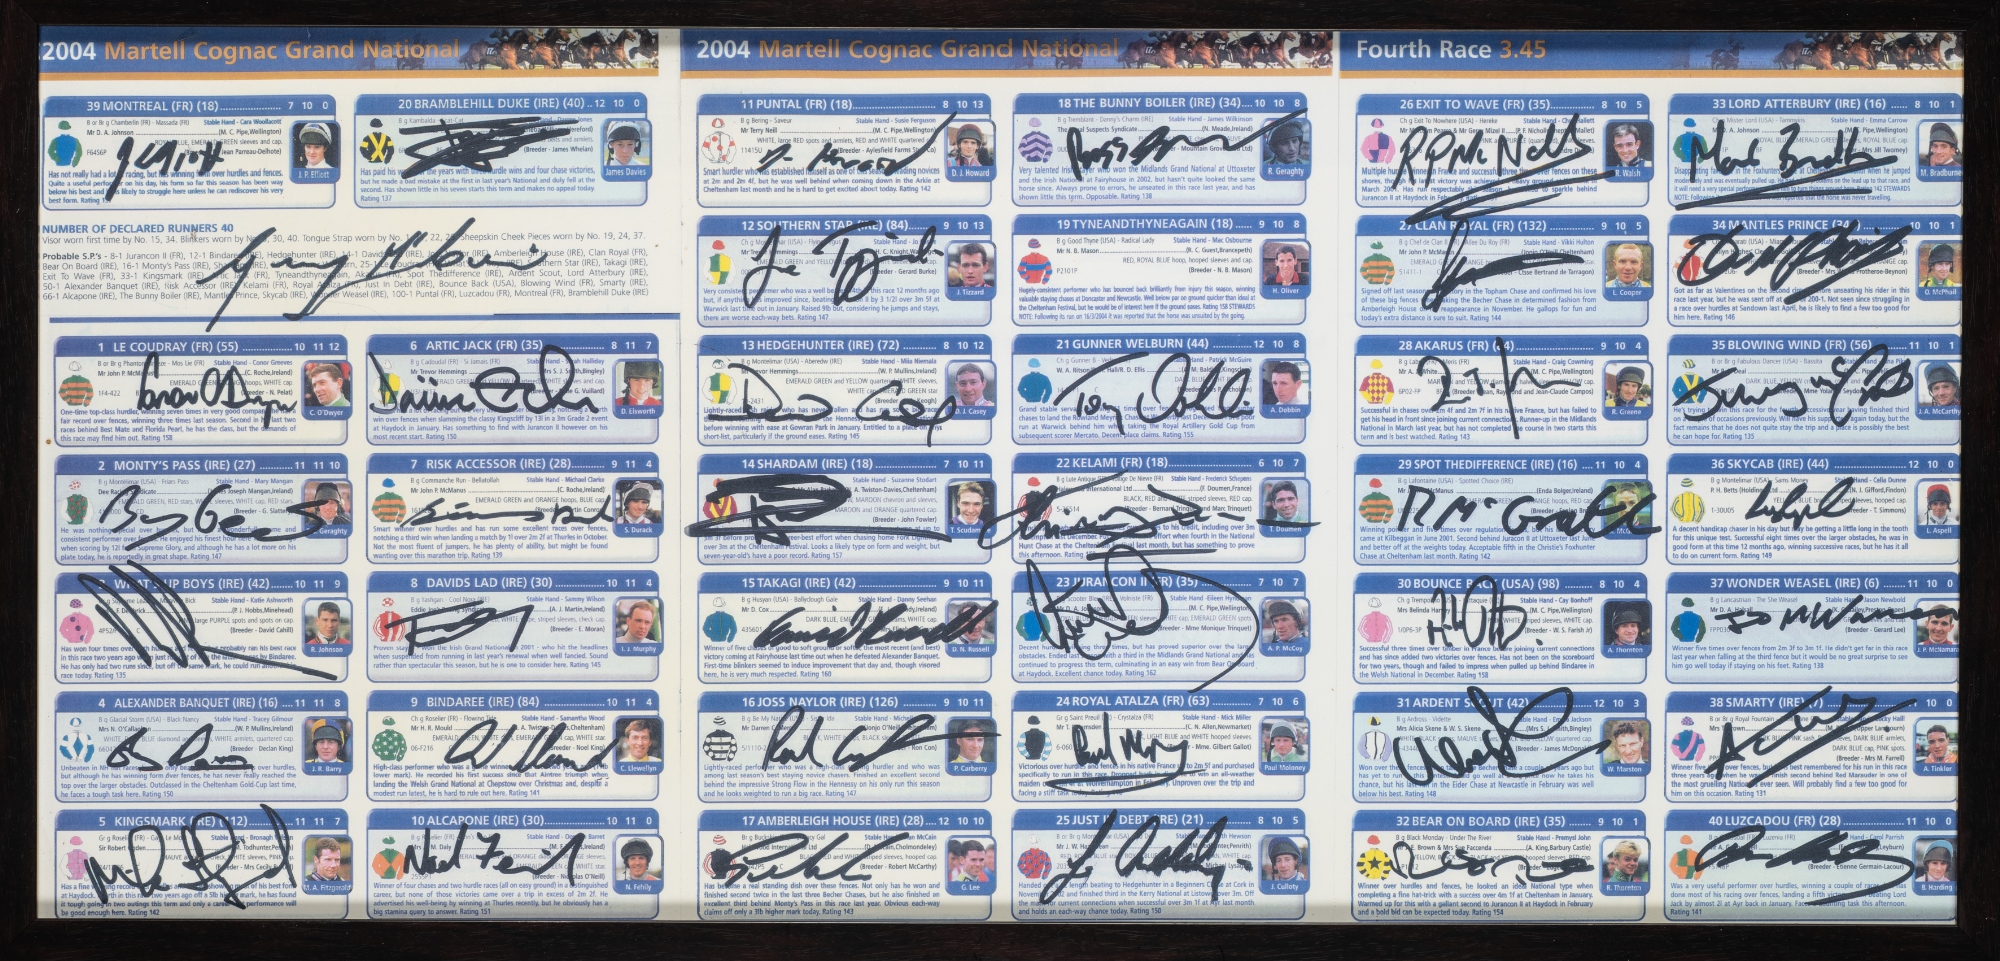 2004 Grand National racecard signed by all the competing jockeys and by the winning trainer Ginger